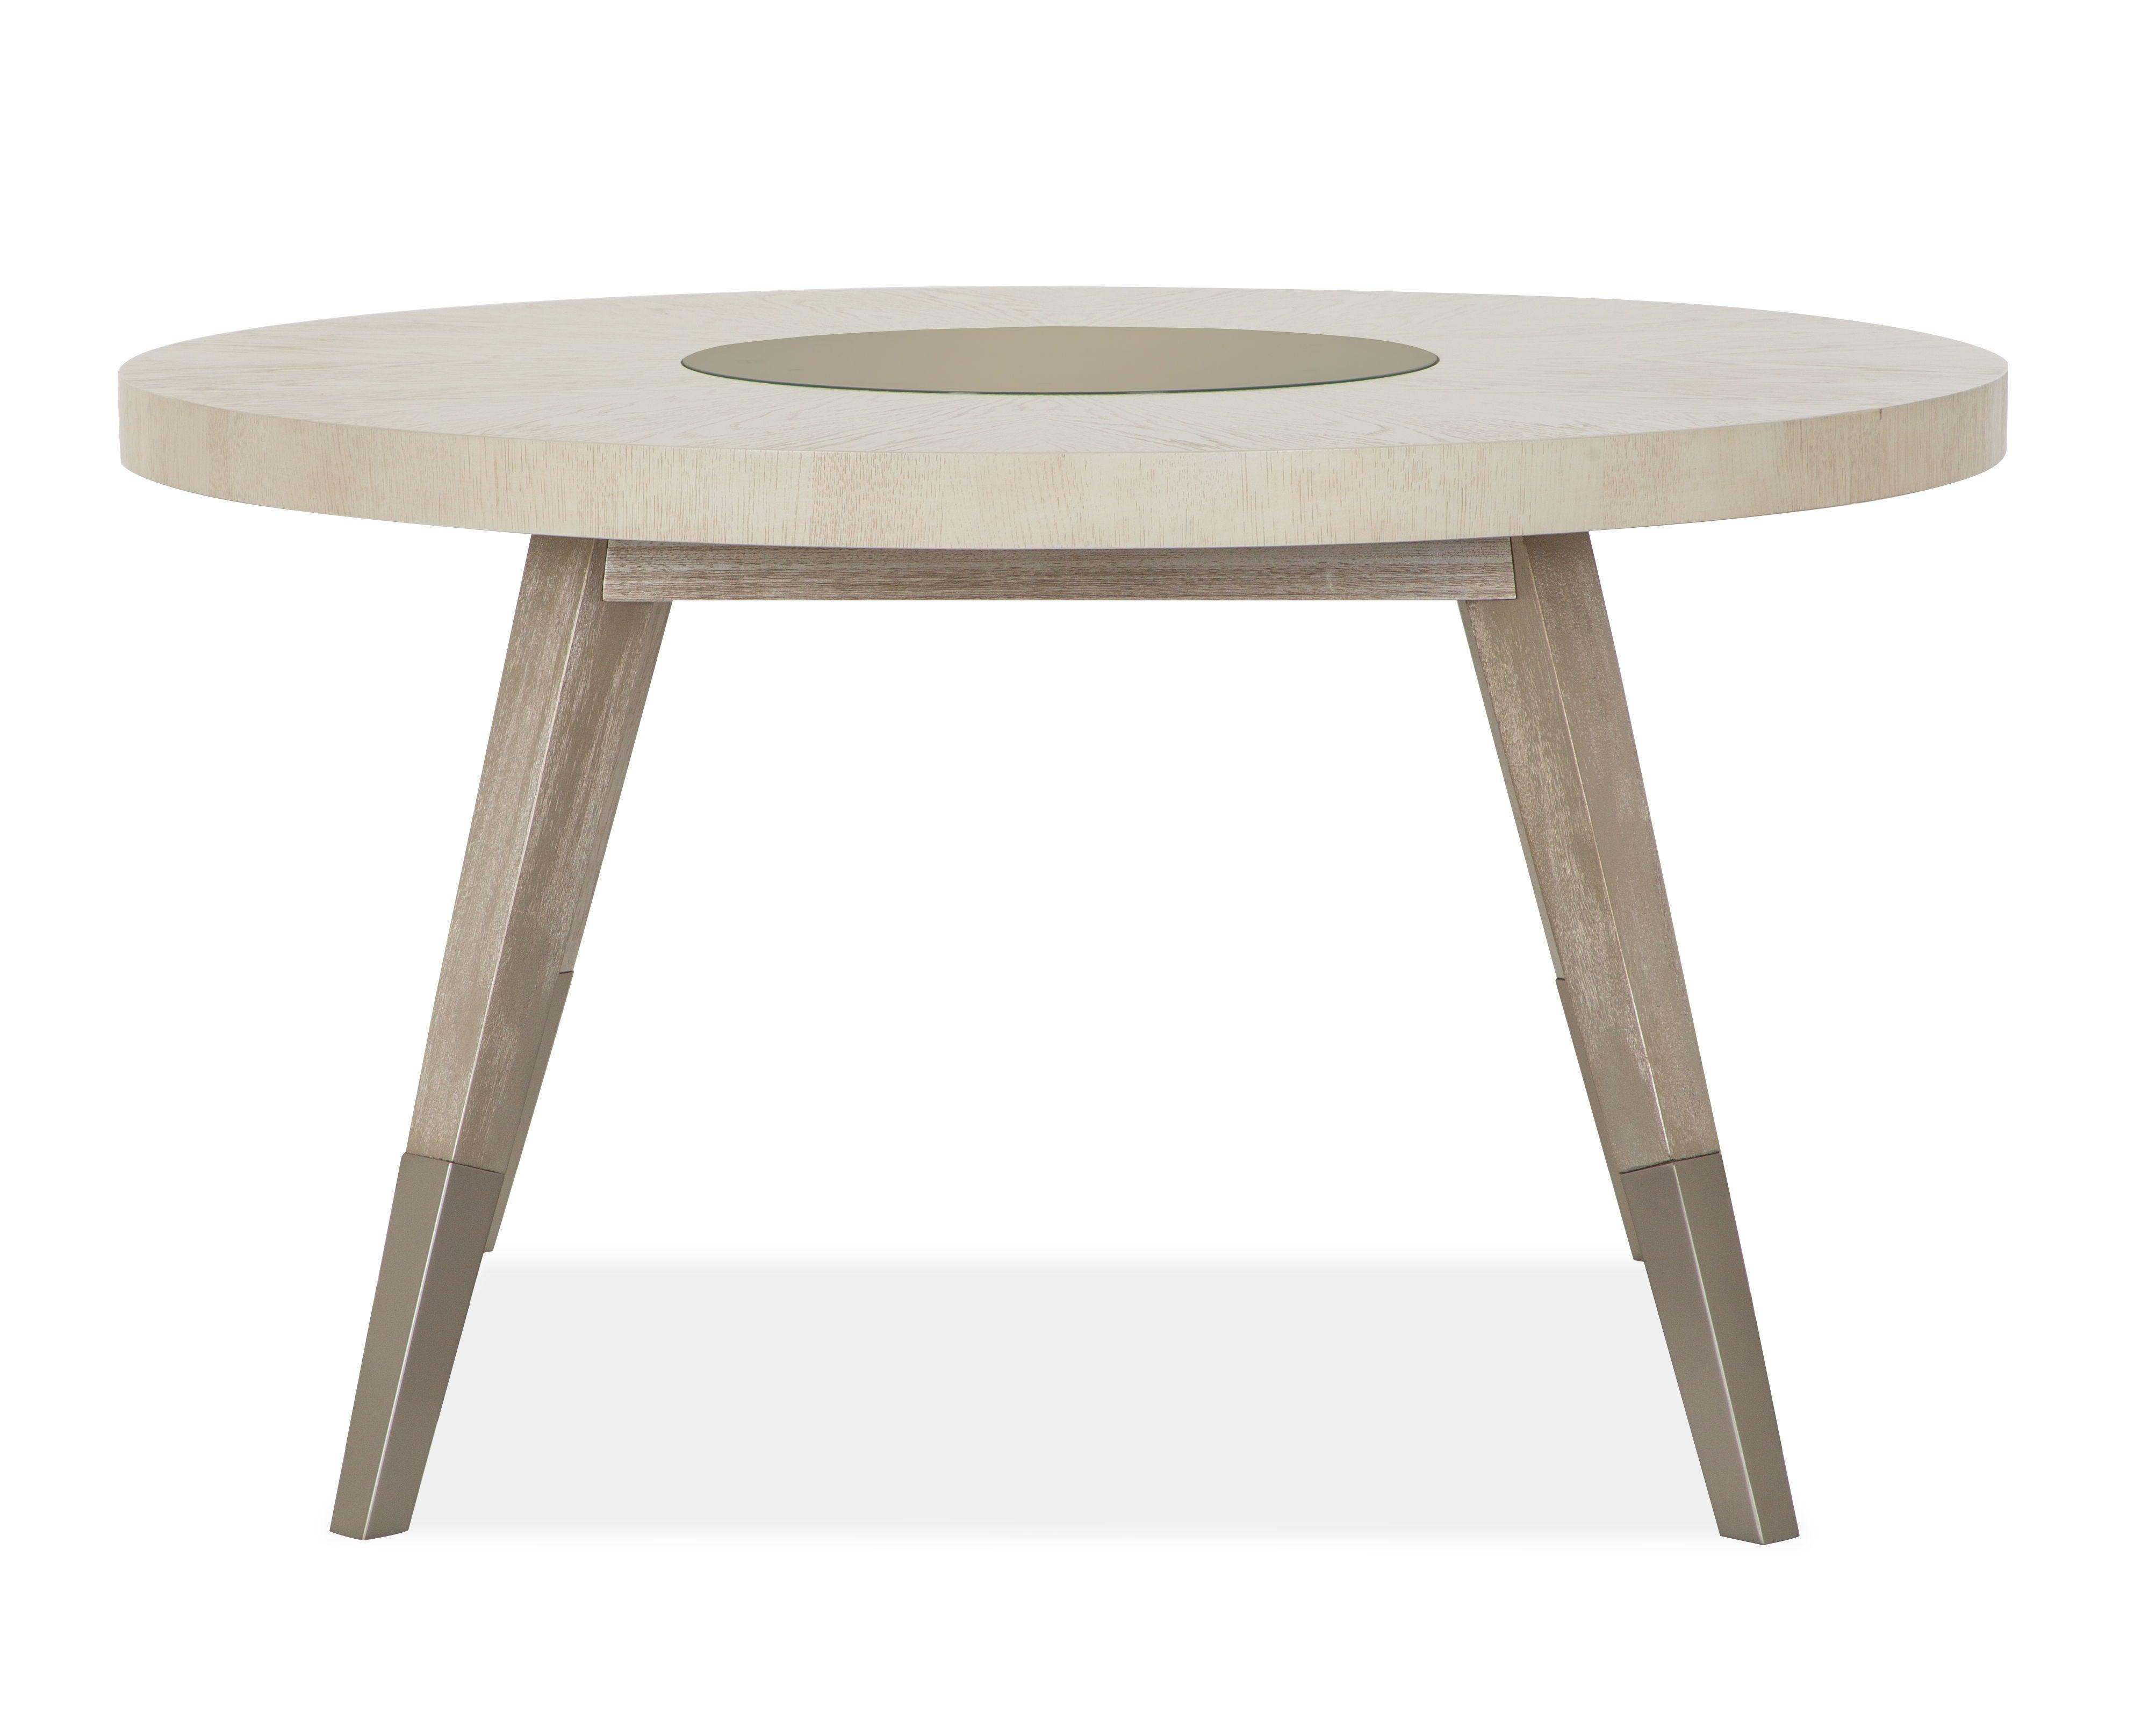 Magnussen Furniture - Lenox - Round Dining Table - Warm Silver - 5th Avenue Furniture